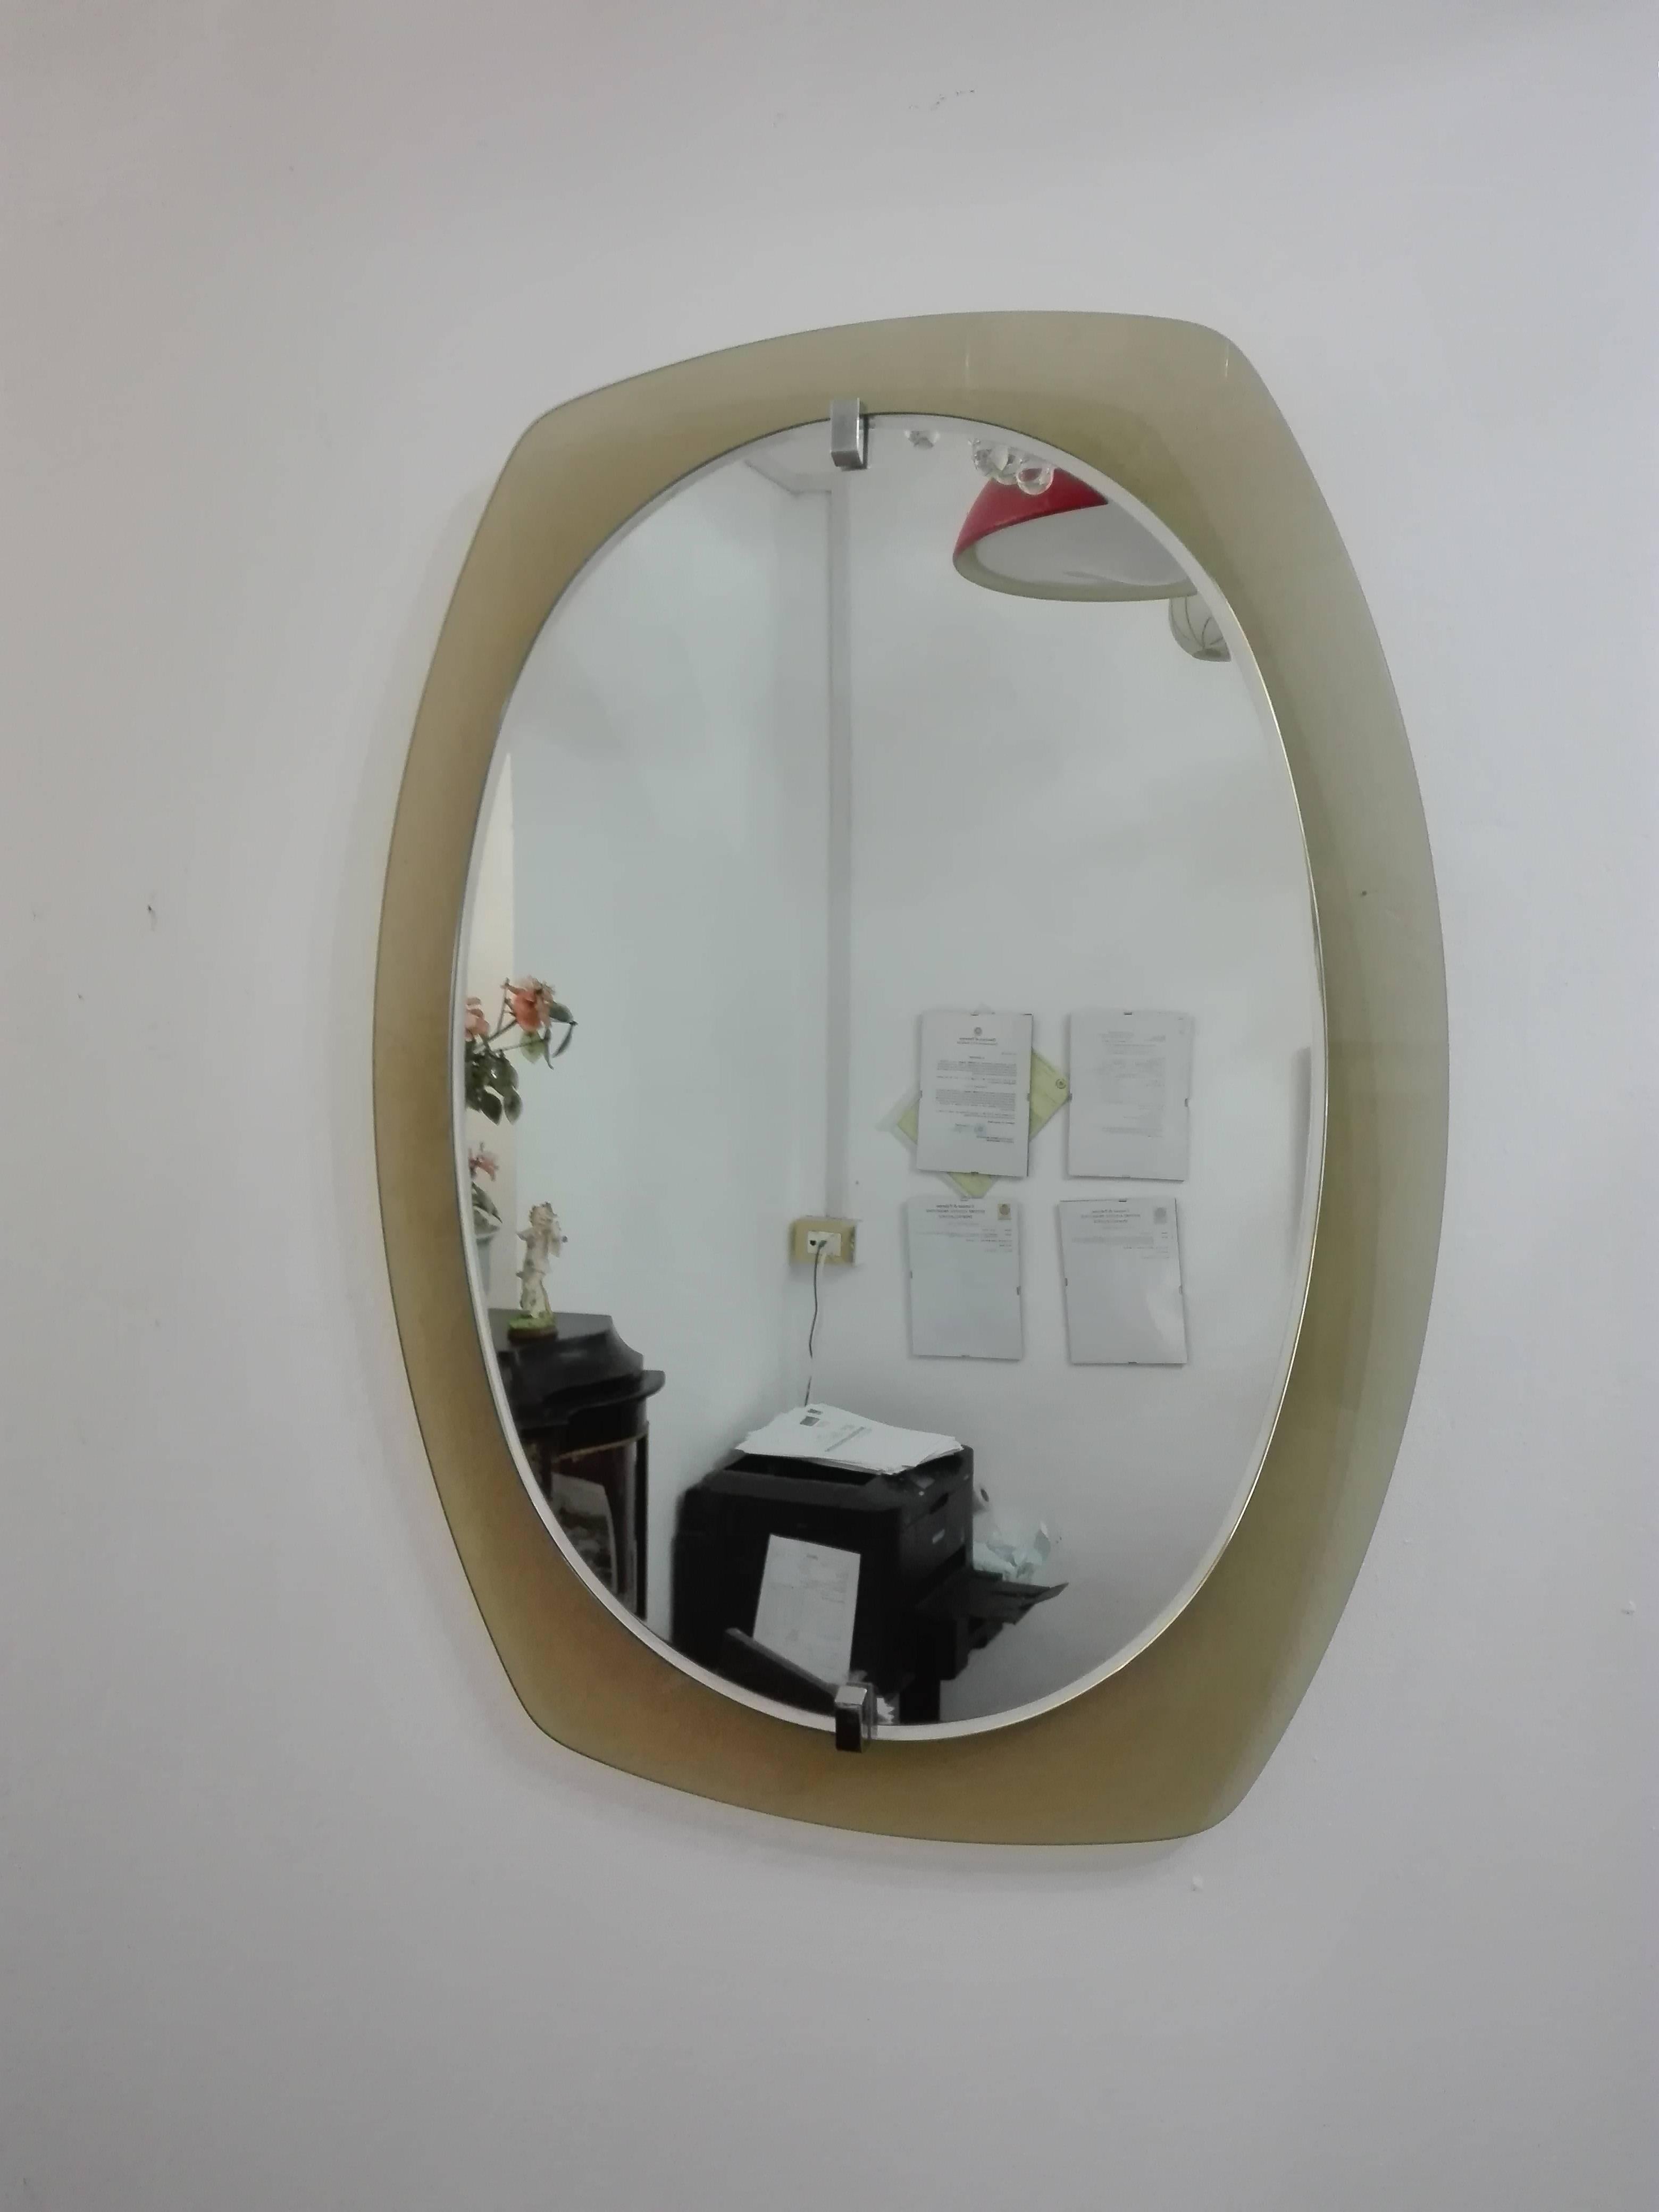 This beveled mirror was produced by Veca in the 1960s. It features a caramel glass frame and nickel plated brass screw heads.